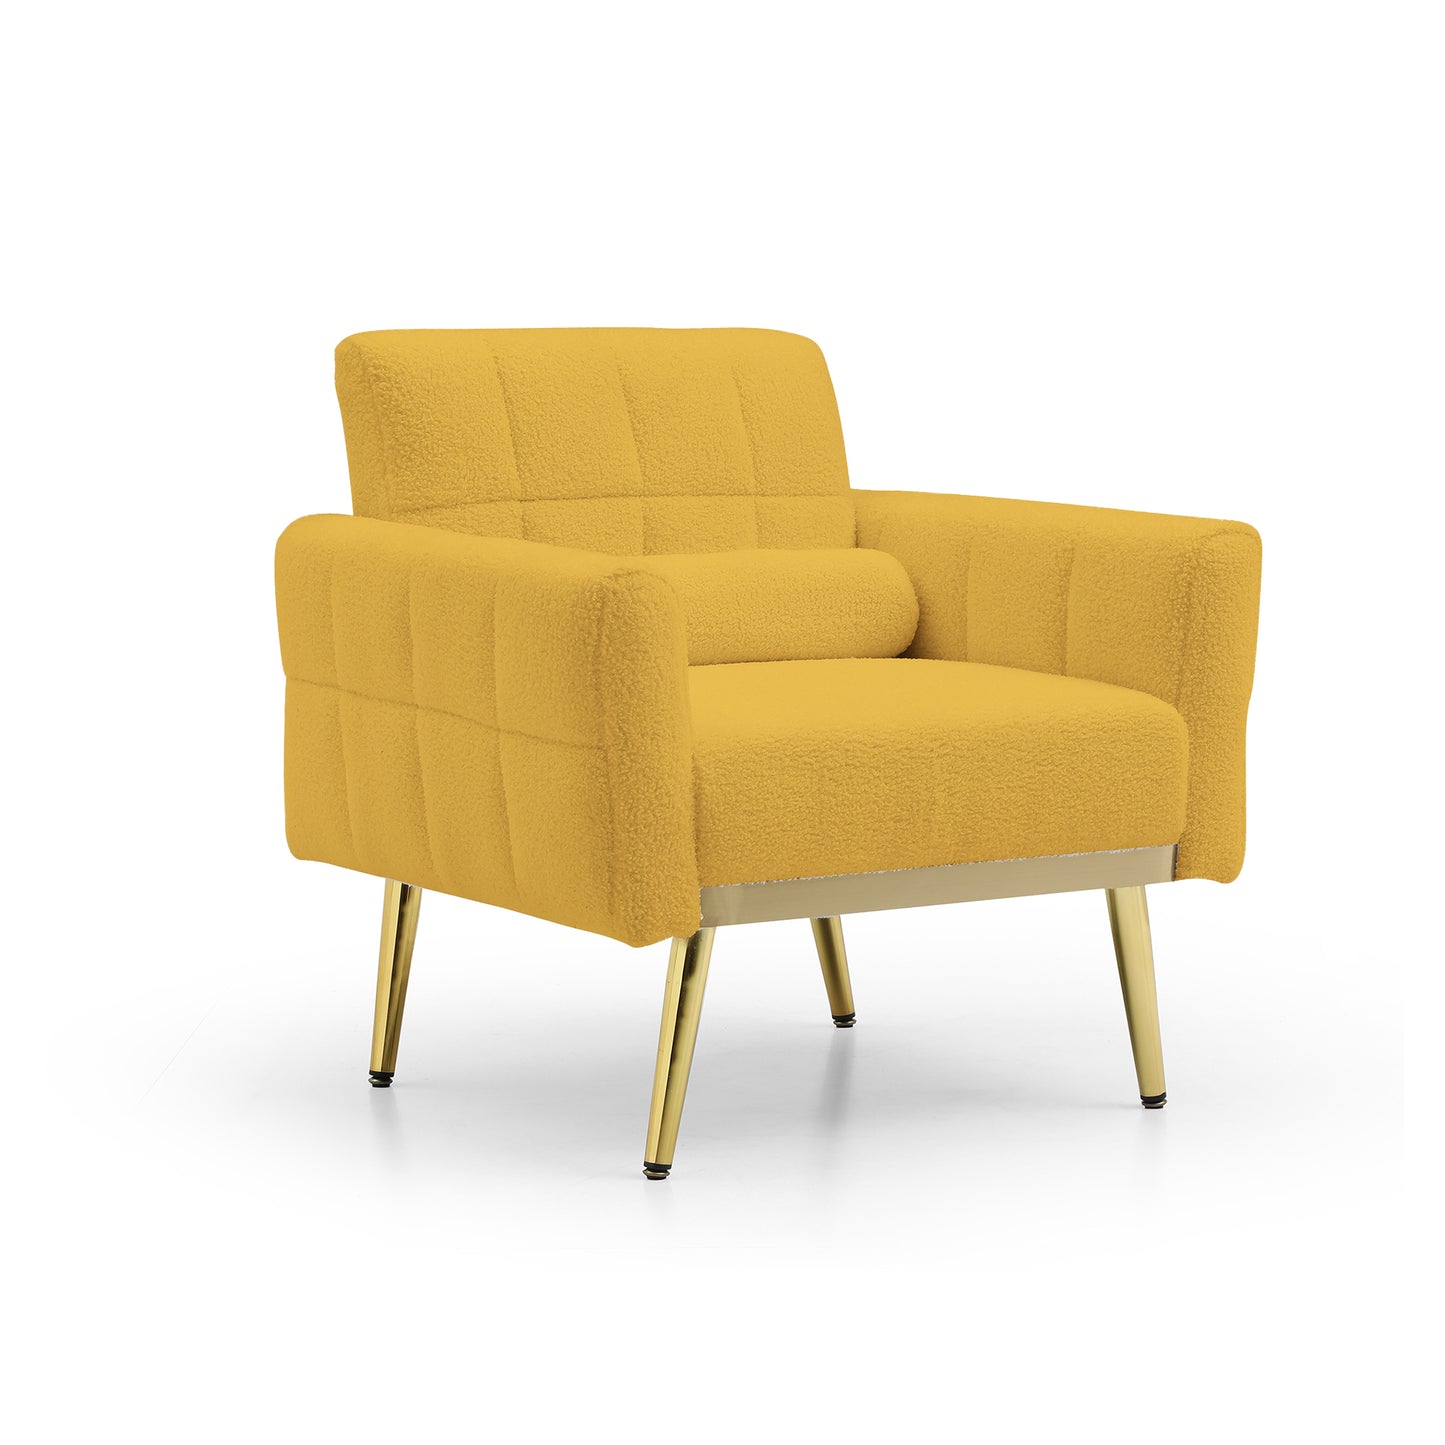 Teddy Accent Chair with Waist Pillow, Modern Upholstered Mid Century Reading Arm Chairs with Metal Legs Comfy Side Lounge Chair Single Sofa for Living Room Bedroom Apartment, Yellow Teddy Fabric. - Enova Luxe Home Store